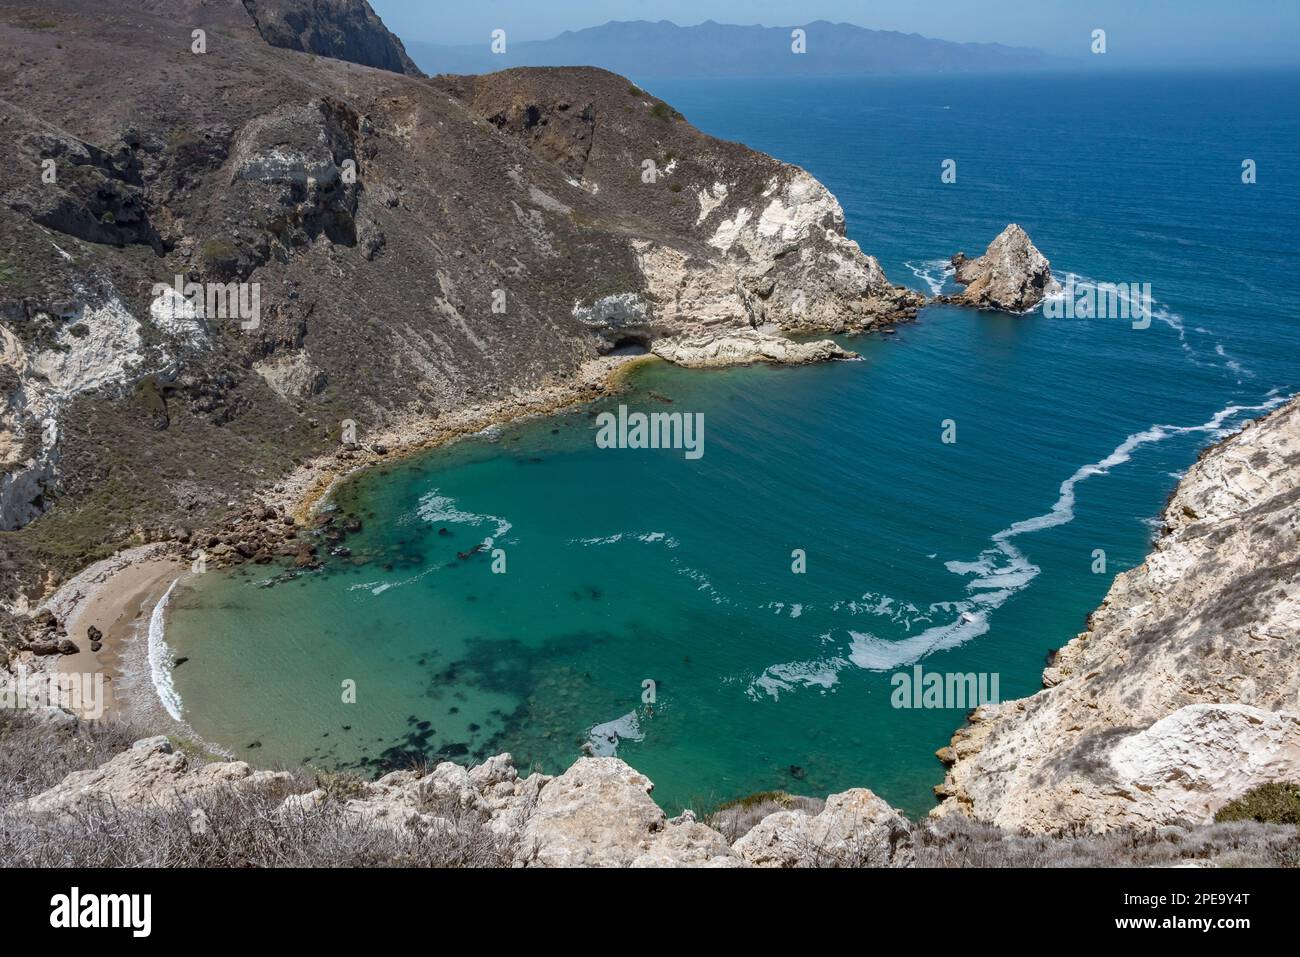 View over Potato Harbor with its turquoise blue water at Santa Cruz Island in Channel Islands National Park, California. Stock Photo